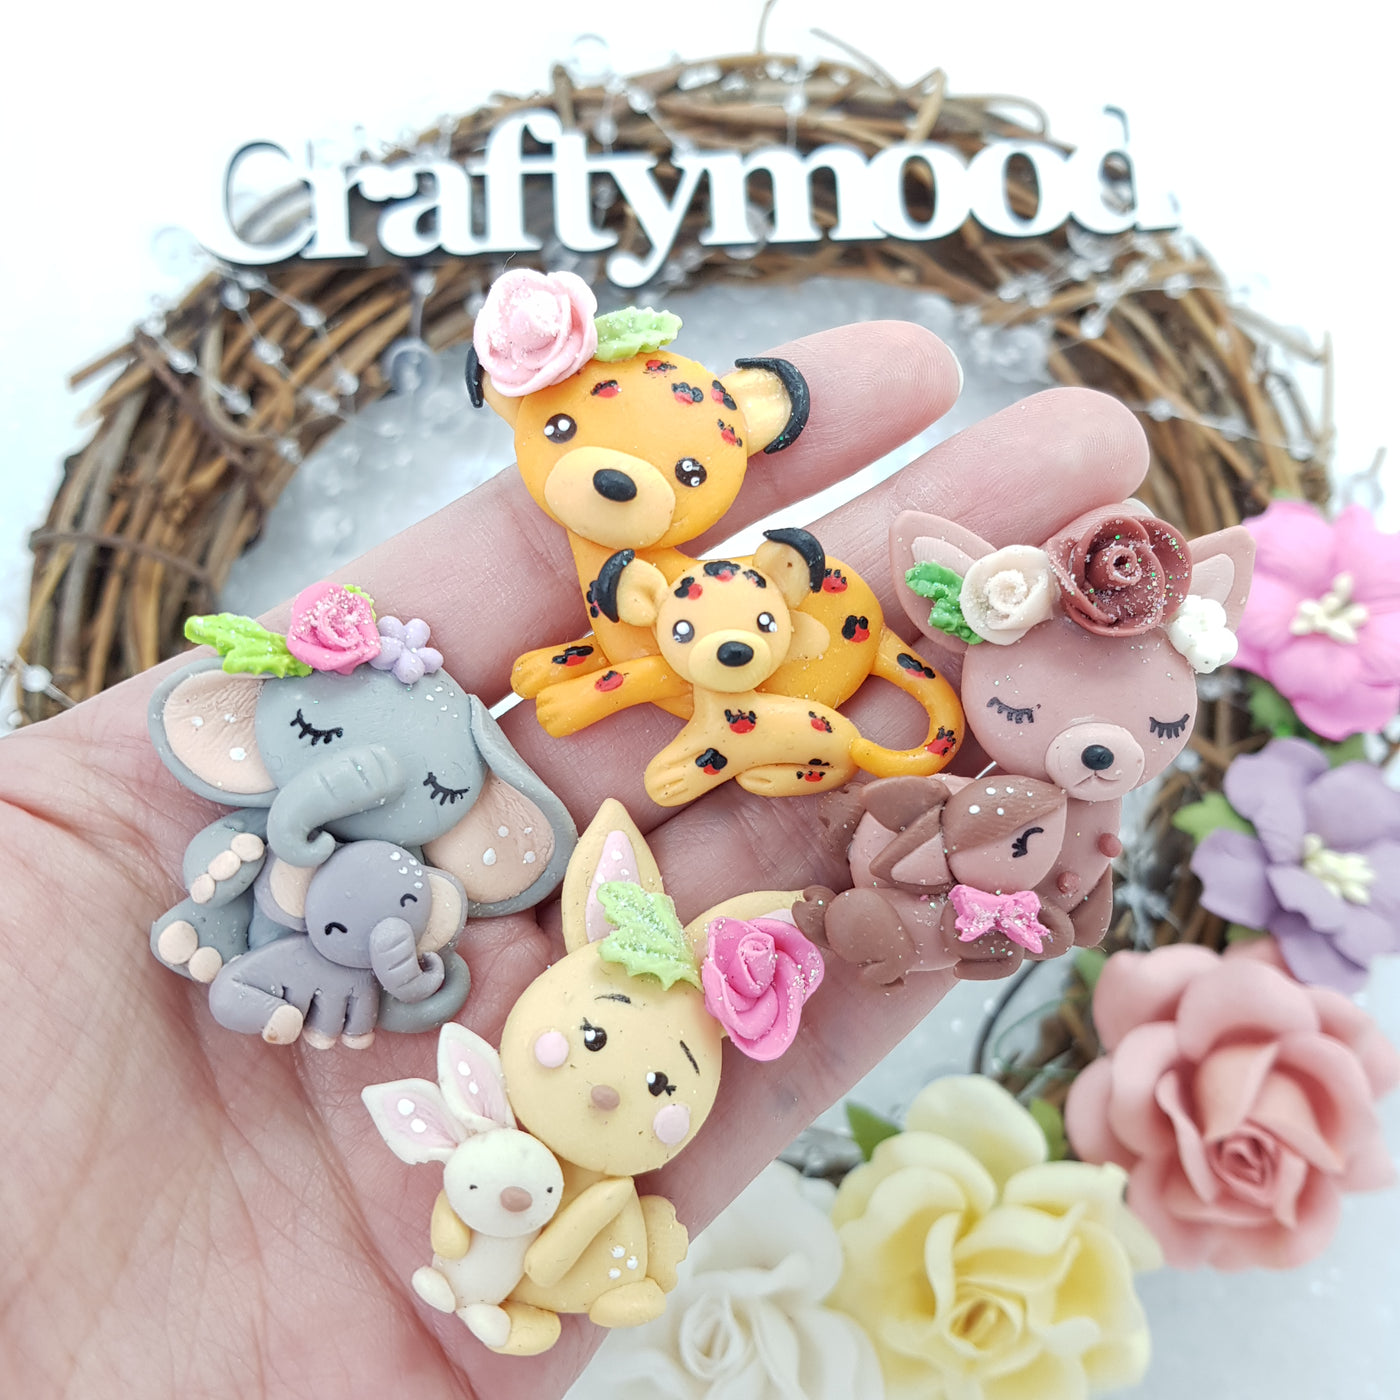 Mommy and me - Embellishment Clay Bow Centre